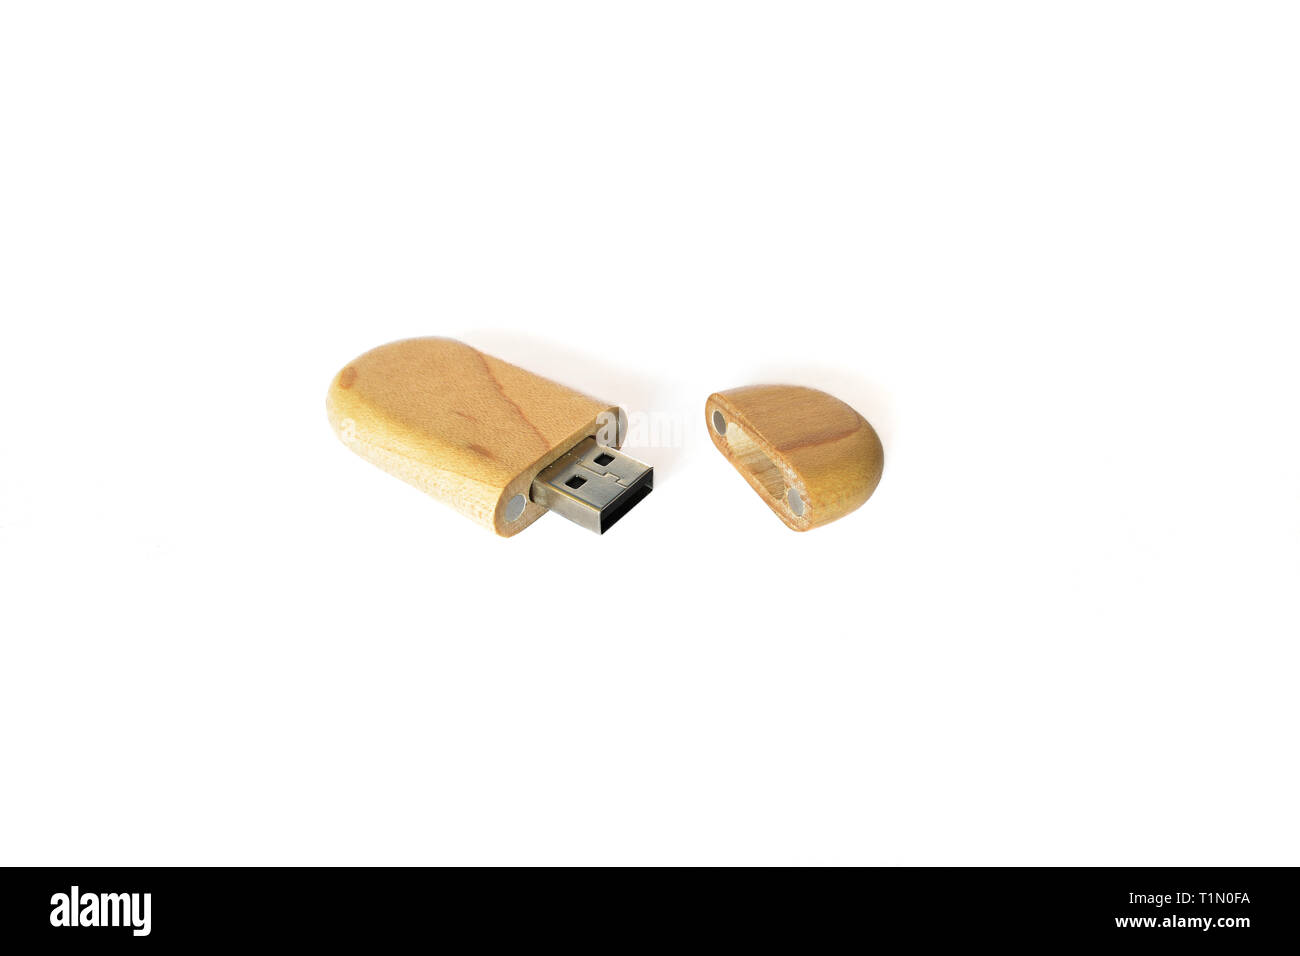 Wooden USB flash memory isolated on a white background, modern combination of technology and natural materials Stock Photo